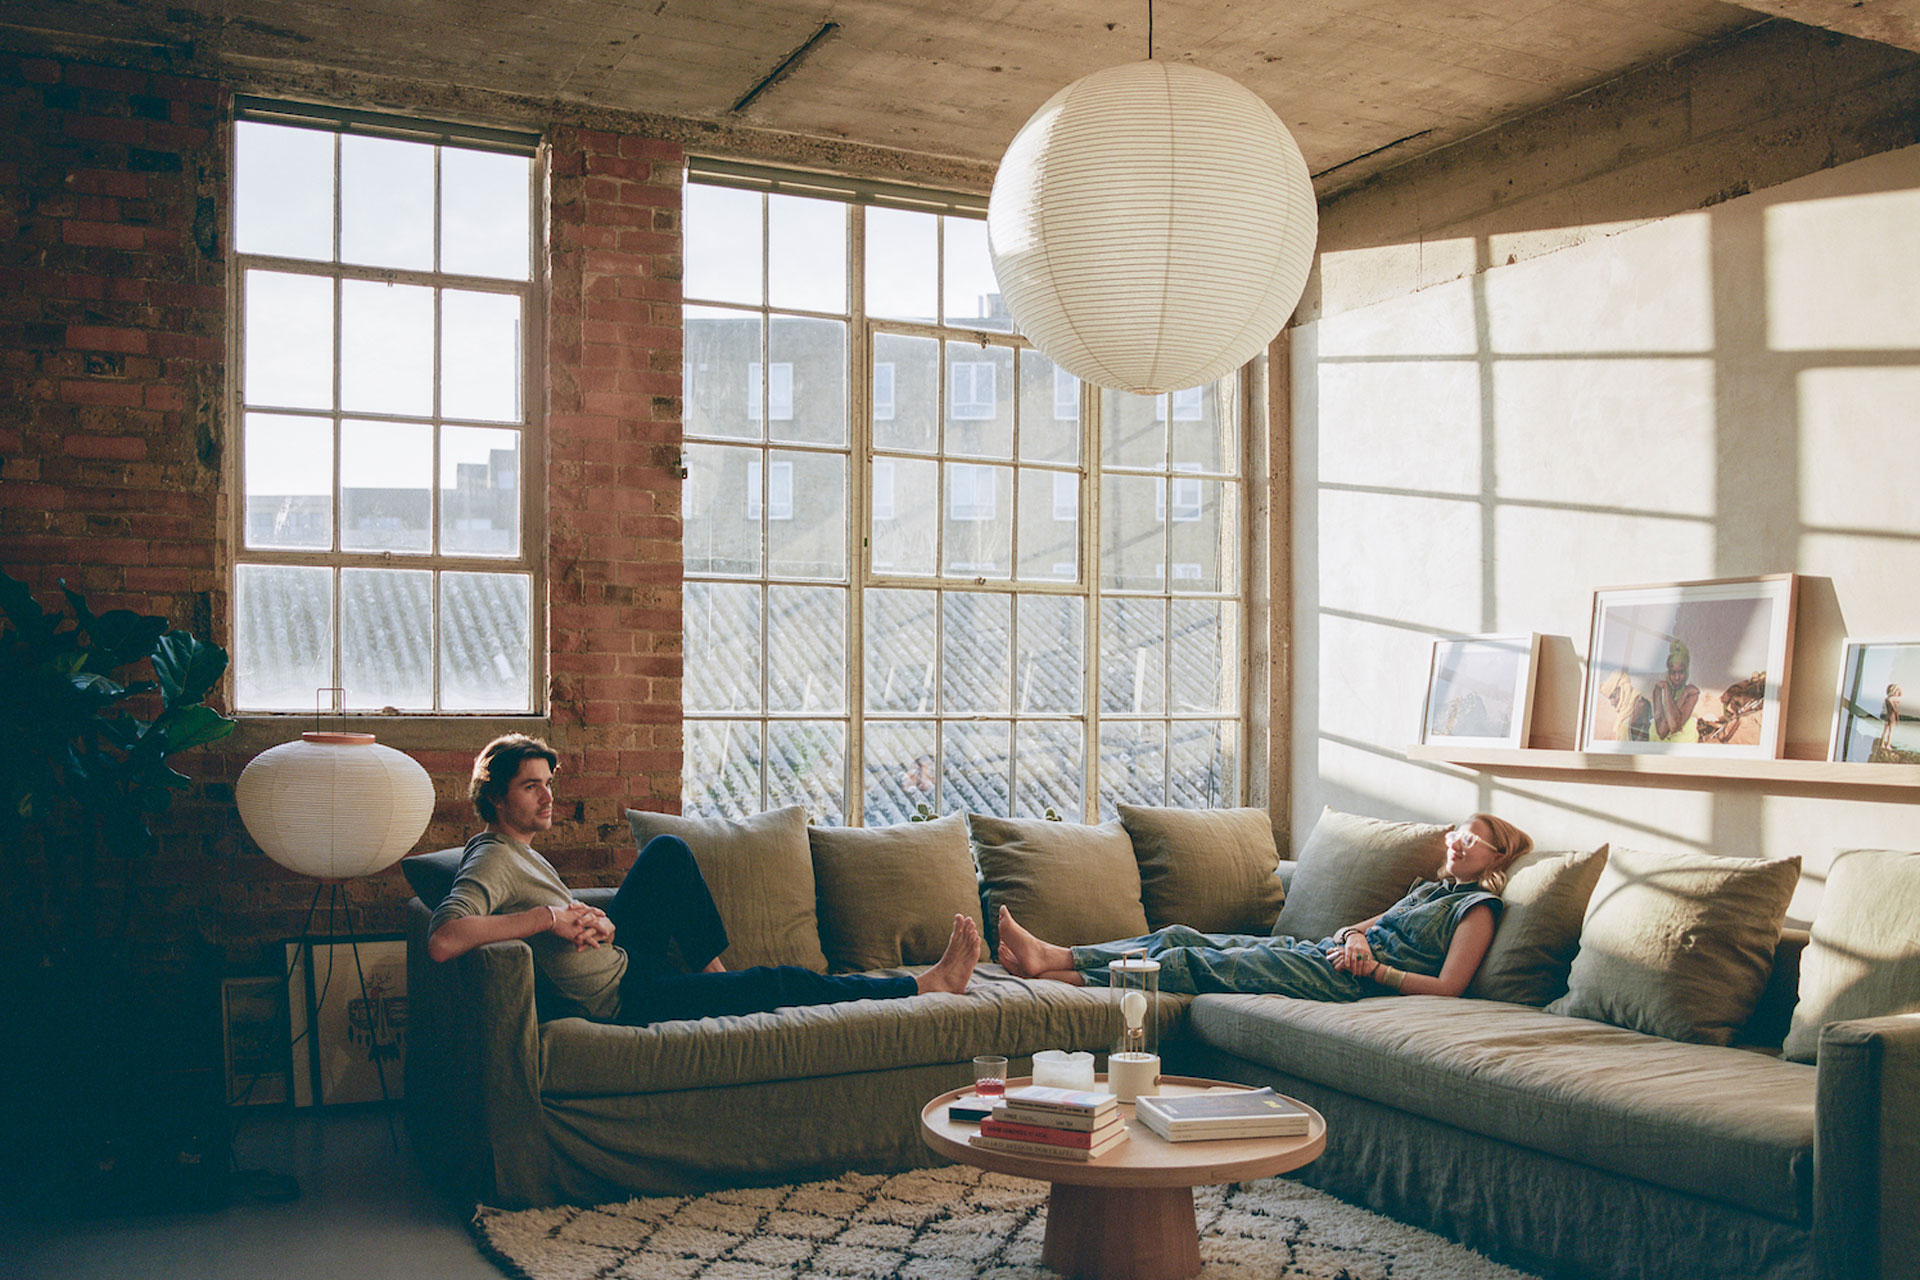 Jack Harries' and Alice Aedy lie on a sage green sofa in the living room of their home in Hackney. The room has floor to ceiling windows, a cocoon ceiling light, a textured checked rug, and a shaft of light is coming through in a refurbished concrete space.